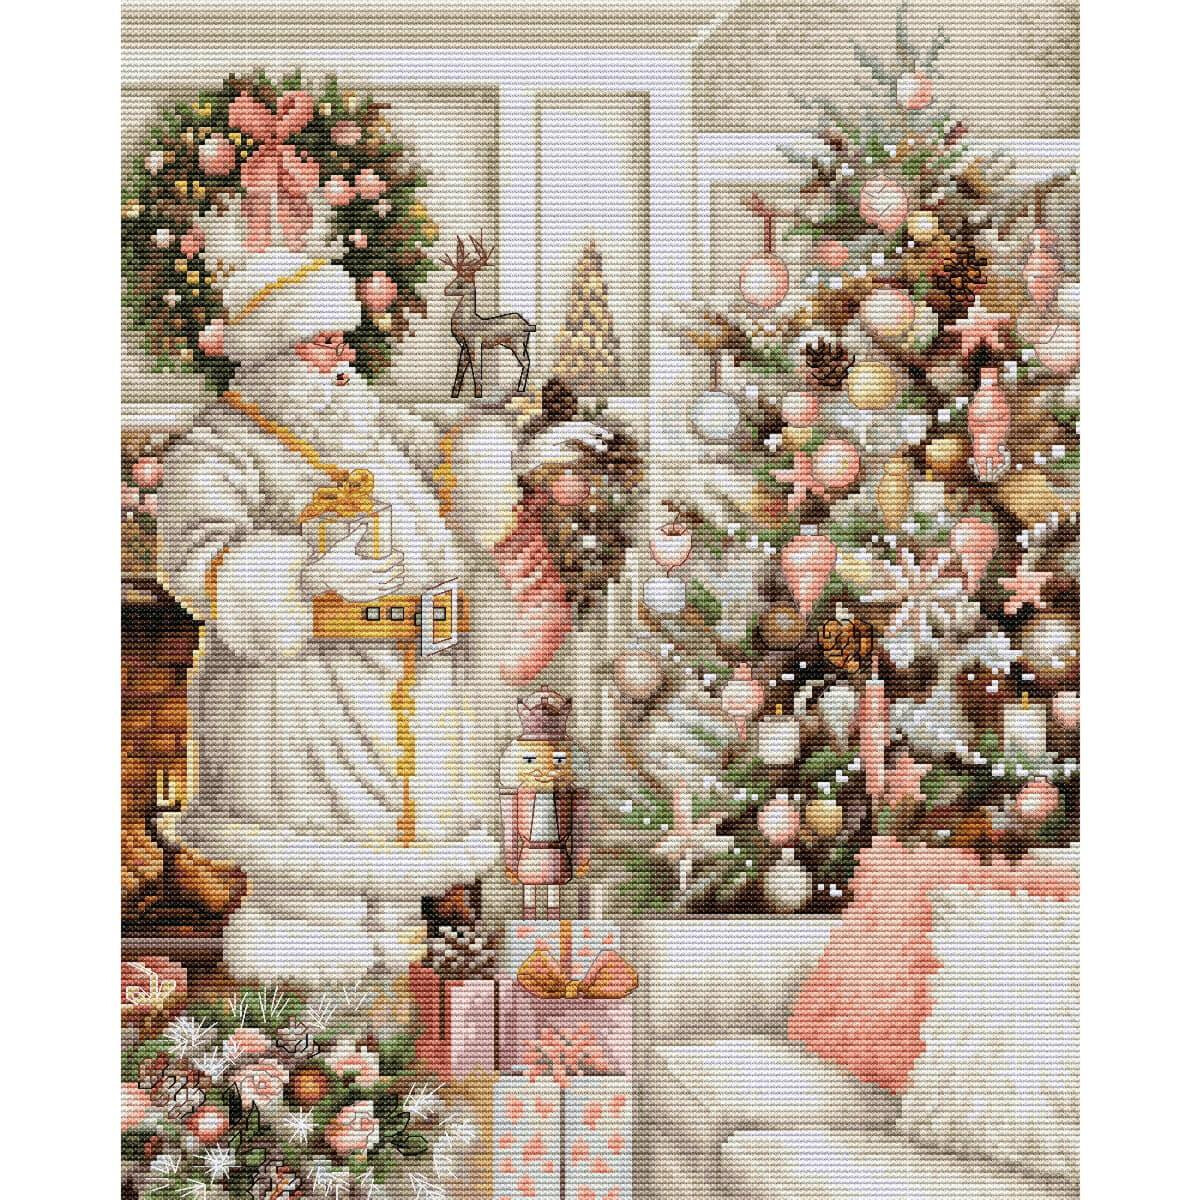 A festive tapestry shows Santa Claus in a white suit...